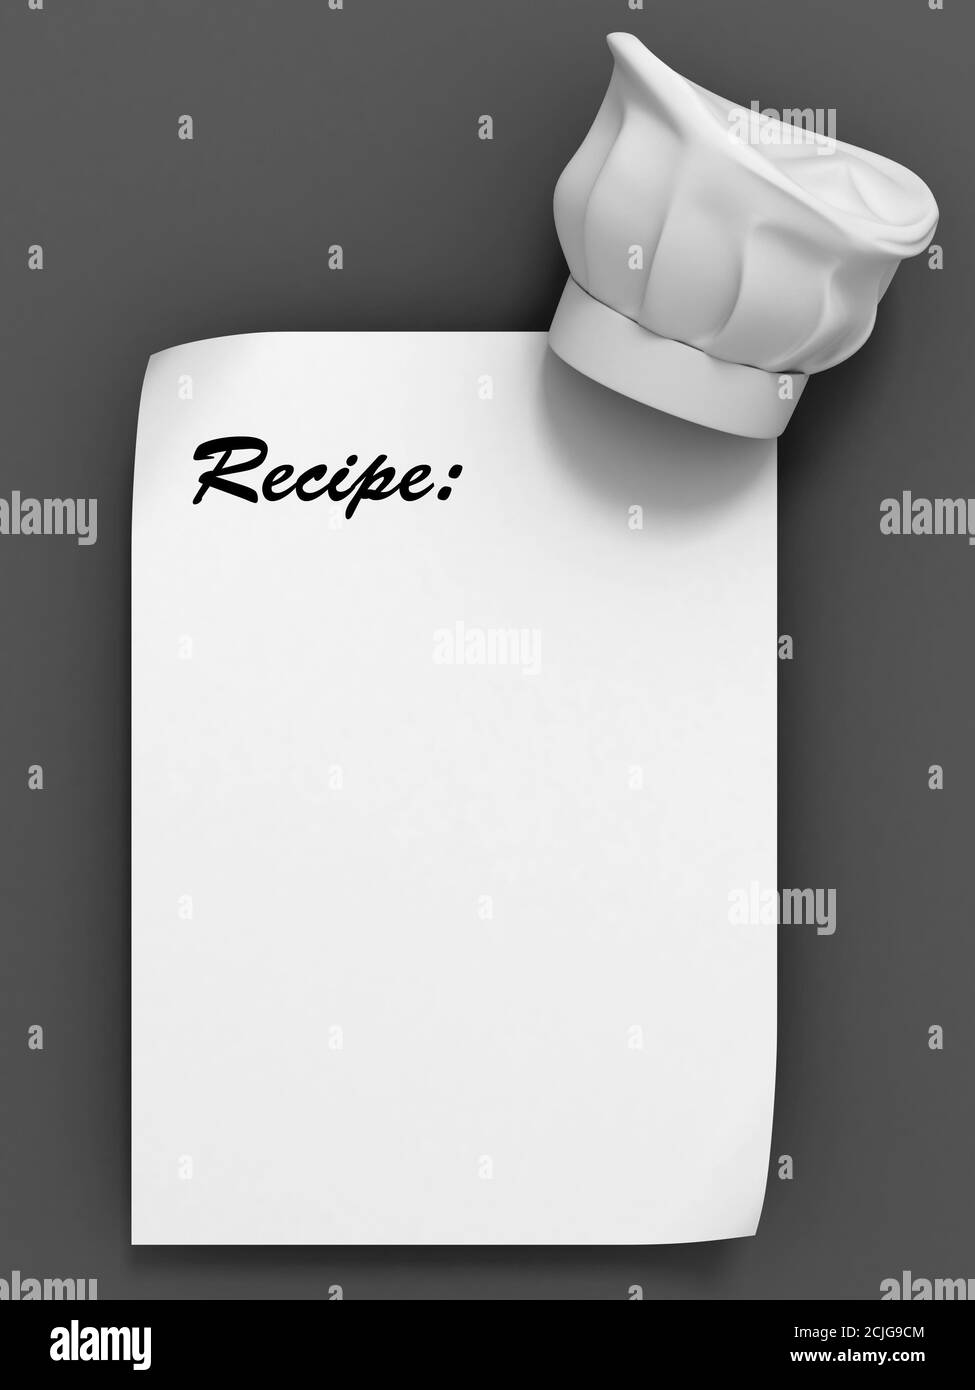 recipe template - chef hat on the blank paper sheet Stock Photo